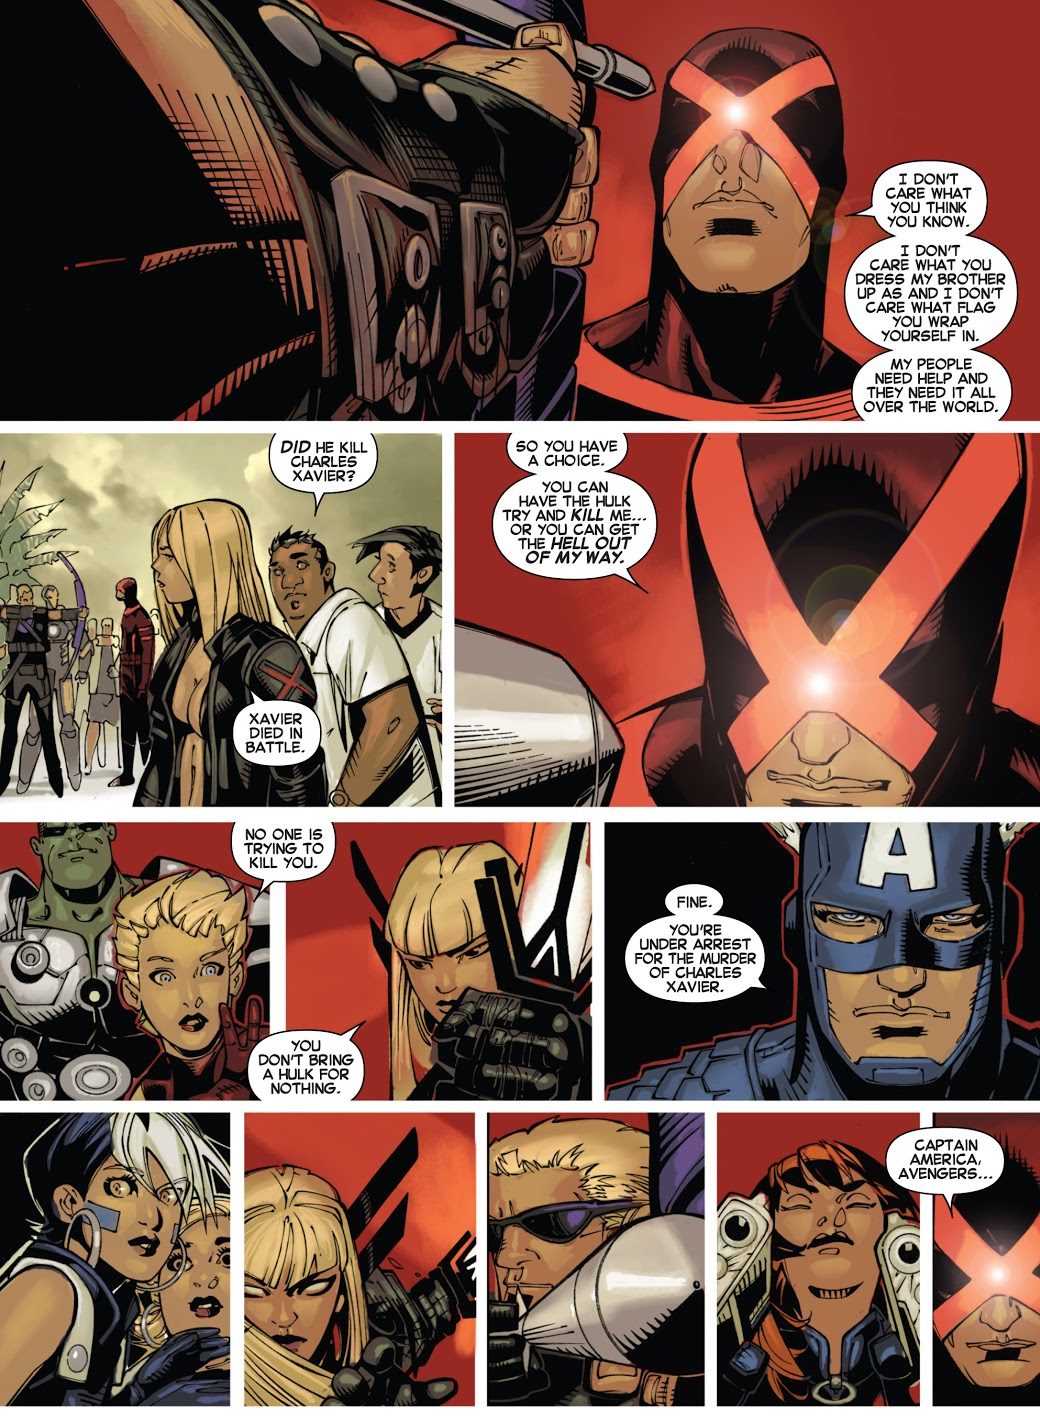 Cyclops Tells The Avengers To Go To Hell